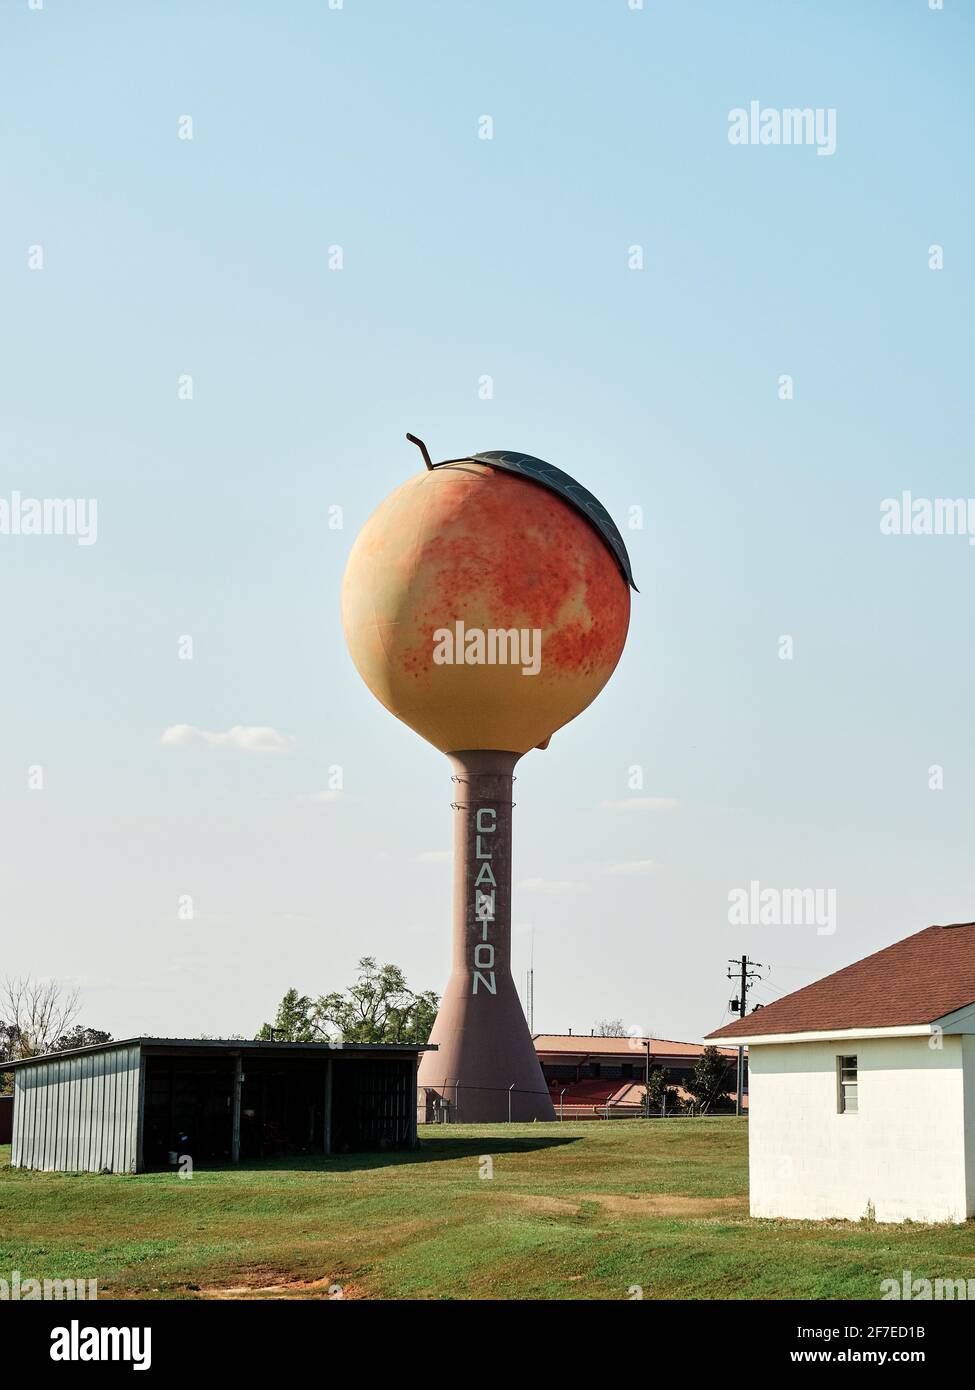 Clanton in Chilton County Alabama, USA, has the large peach water tower overlooking peach orchards. Stock Photo